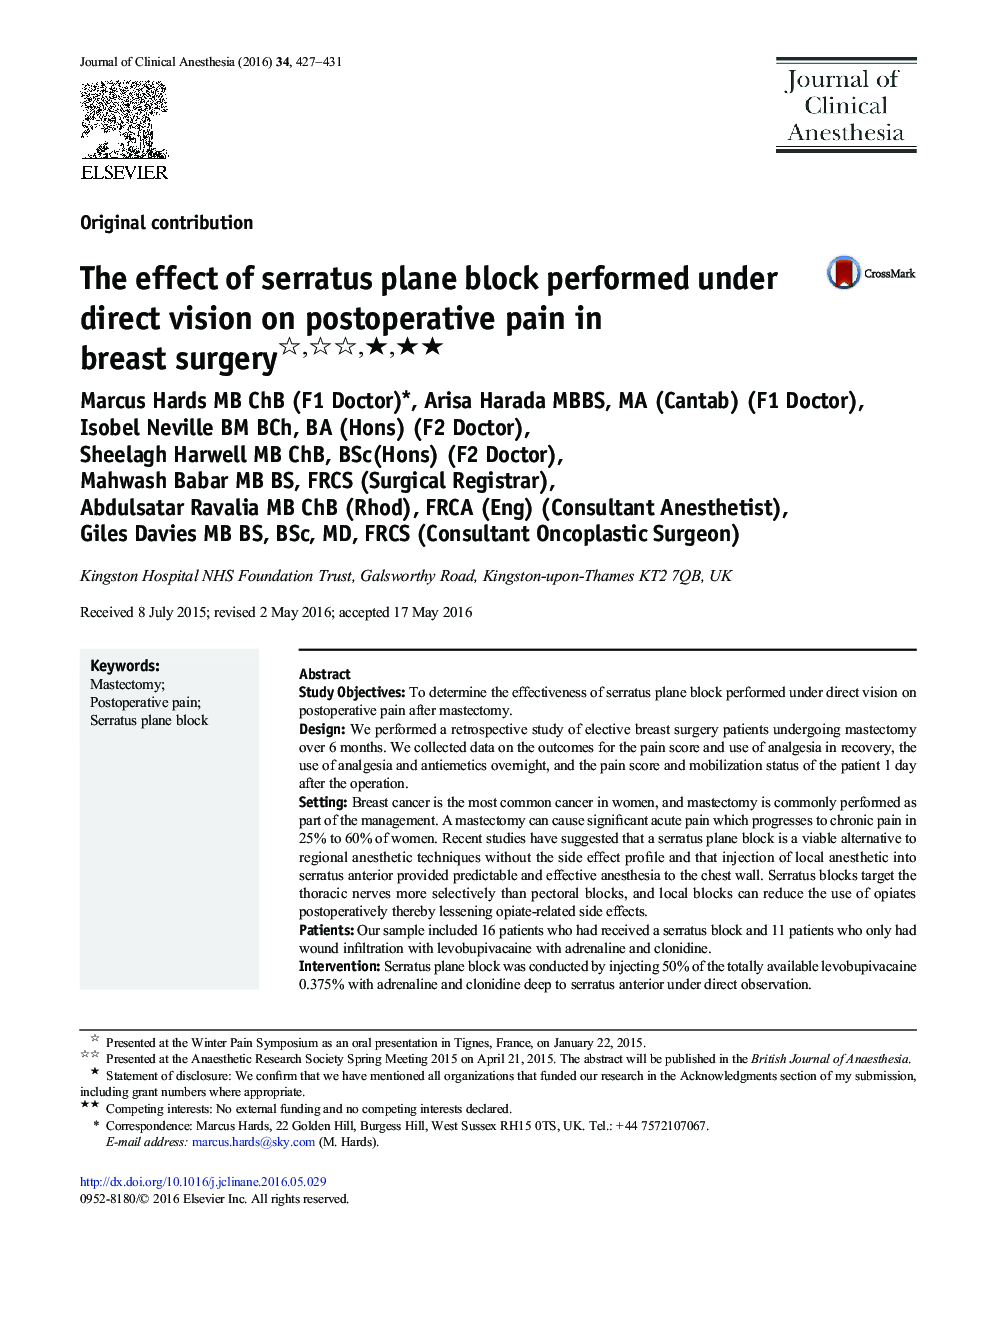 The effect of serratus plane block performed under direct vision on postoperative pain in breast surgery